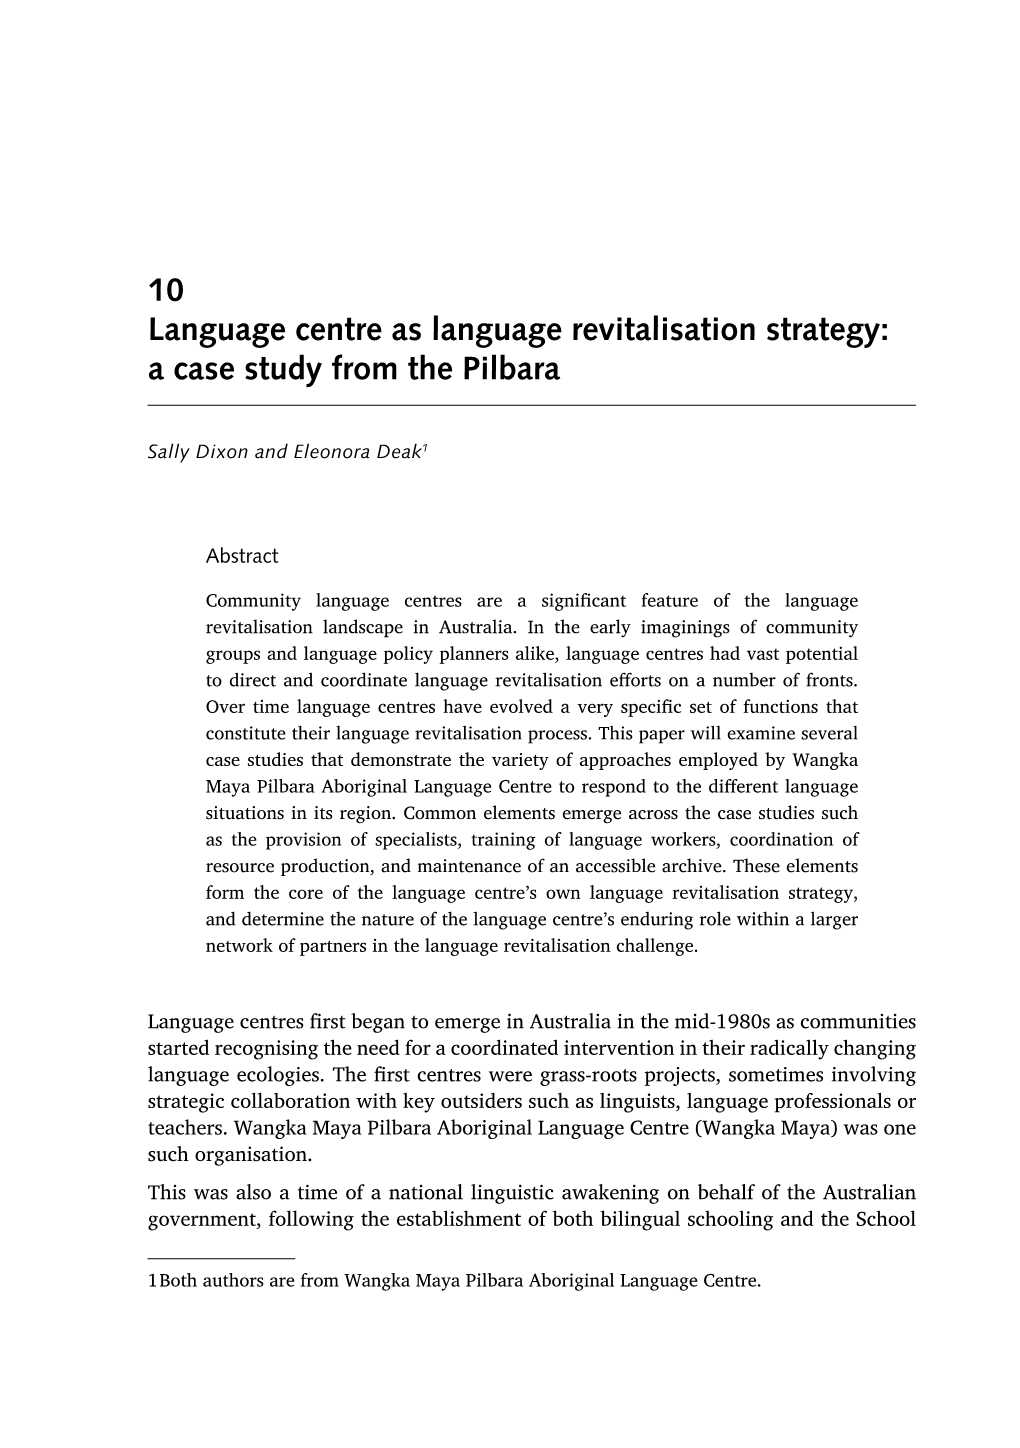 10 Language Centre As Language Revitalisation Strategy: a Case Study from the Pilbara